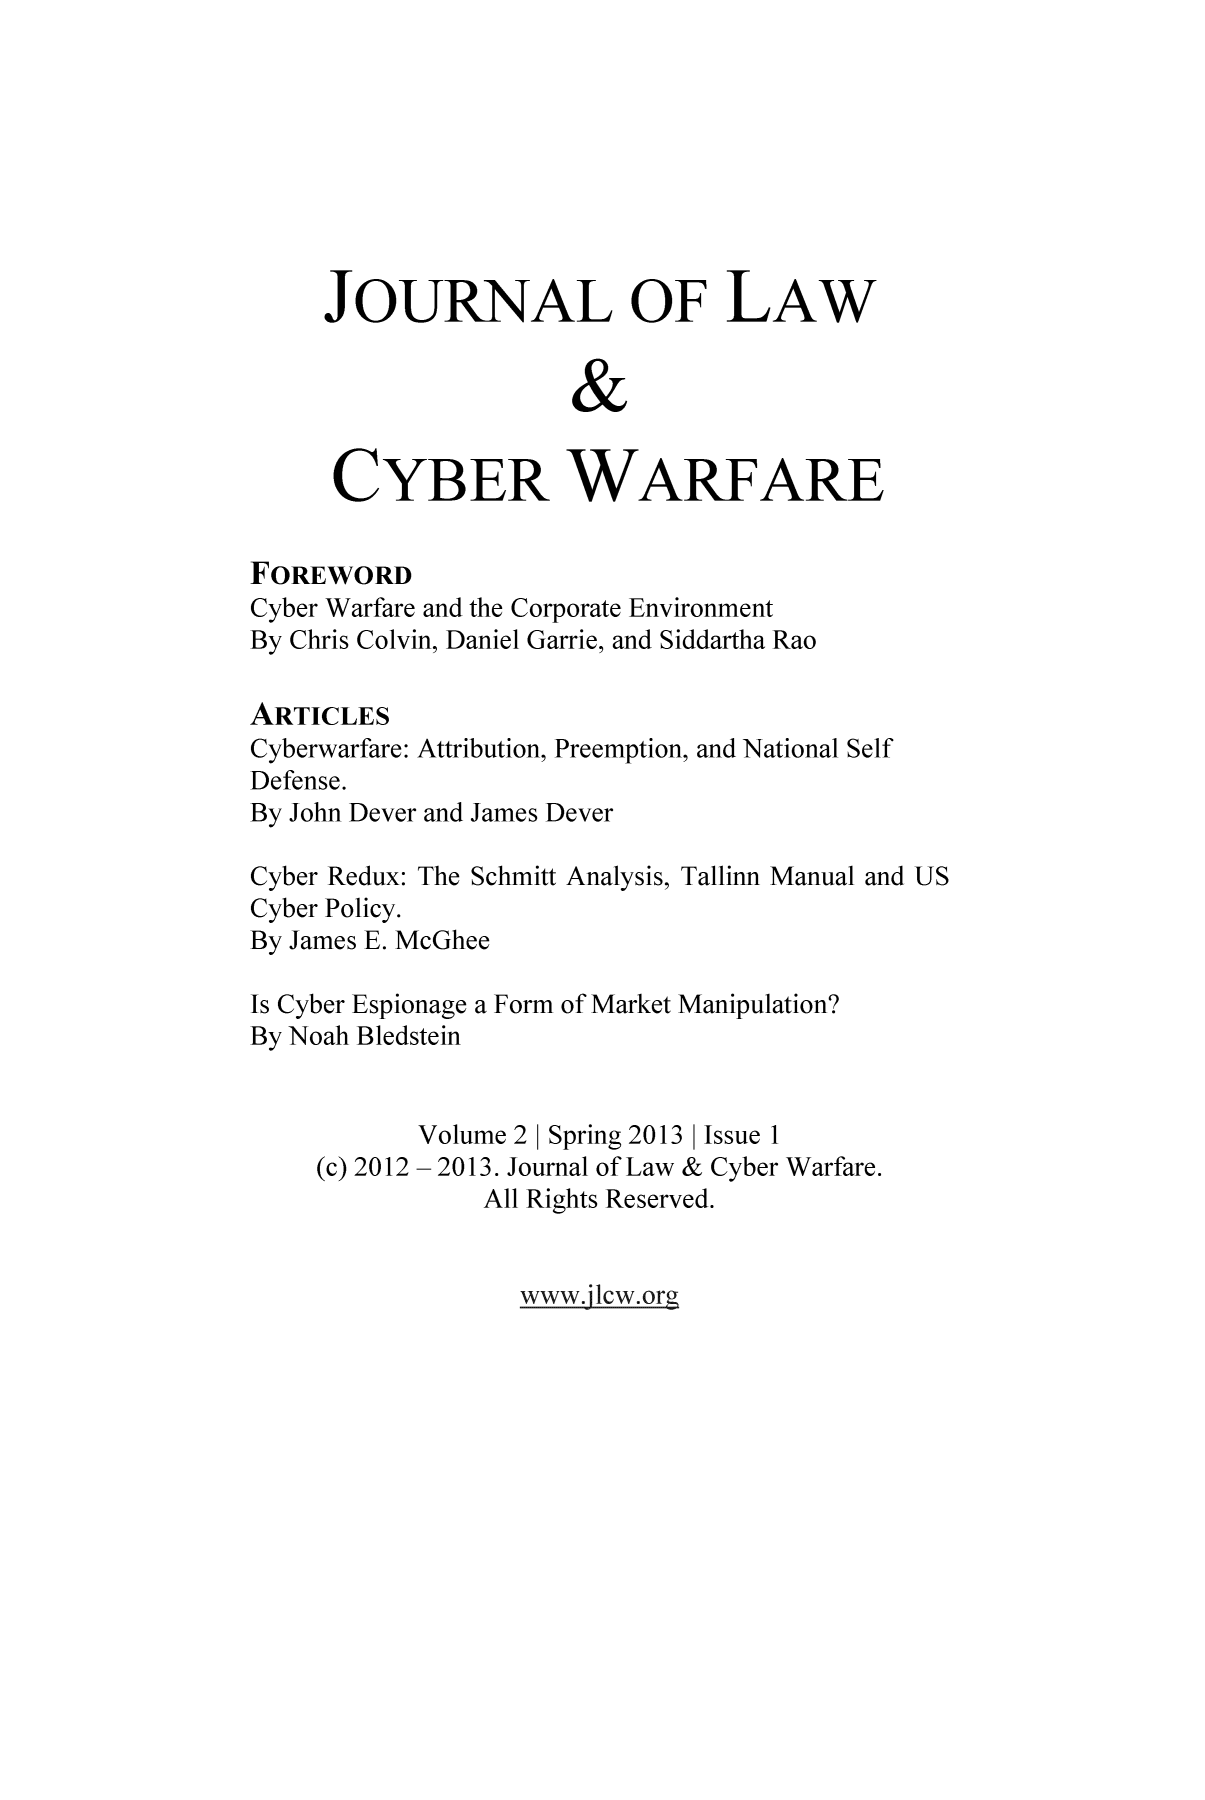 handle is hein.journals/jlacybrwa2 and id is 1 raw text is: JOURNAL OF LAW
&
CYBER WARFARE
FOREWORD
Cyber Warfare and the Corporate Environment
By Chris Colvin, Daniel Garrie, and Siddartha Rao
ARTICLES
Cyberwarfare: Attribution, Preemption, and National Self
Defense.
By John Dever and James Dever
Cyber Redux: The Schmitt Analysis, Tallinn Manual and US
Cyber Policy.
By James E. McGhee
Is Cyber Espionage a Form of Market Manipulation?
By Noah Bledstein
Volume 2 | Spring 2013 | Issue 1
(c) 2012 - 2013. Journal of Law & Cyber Warfare.
All Rights Reserved.

www .jlcw .org


